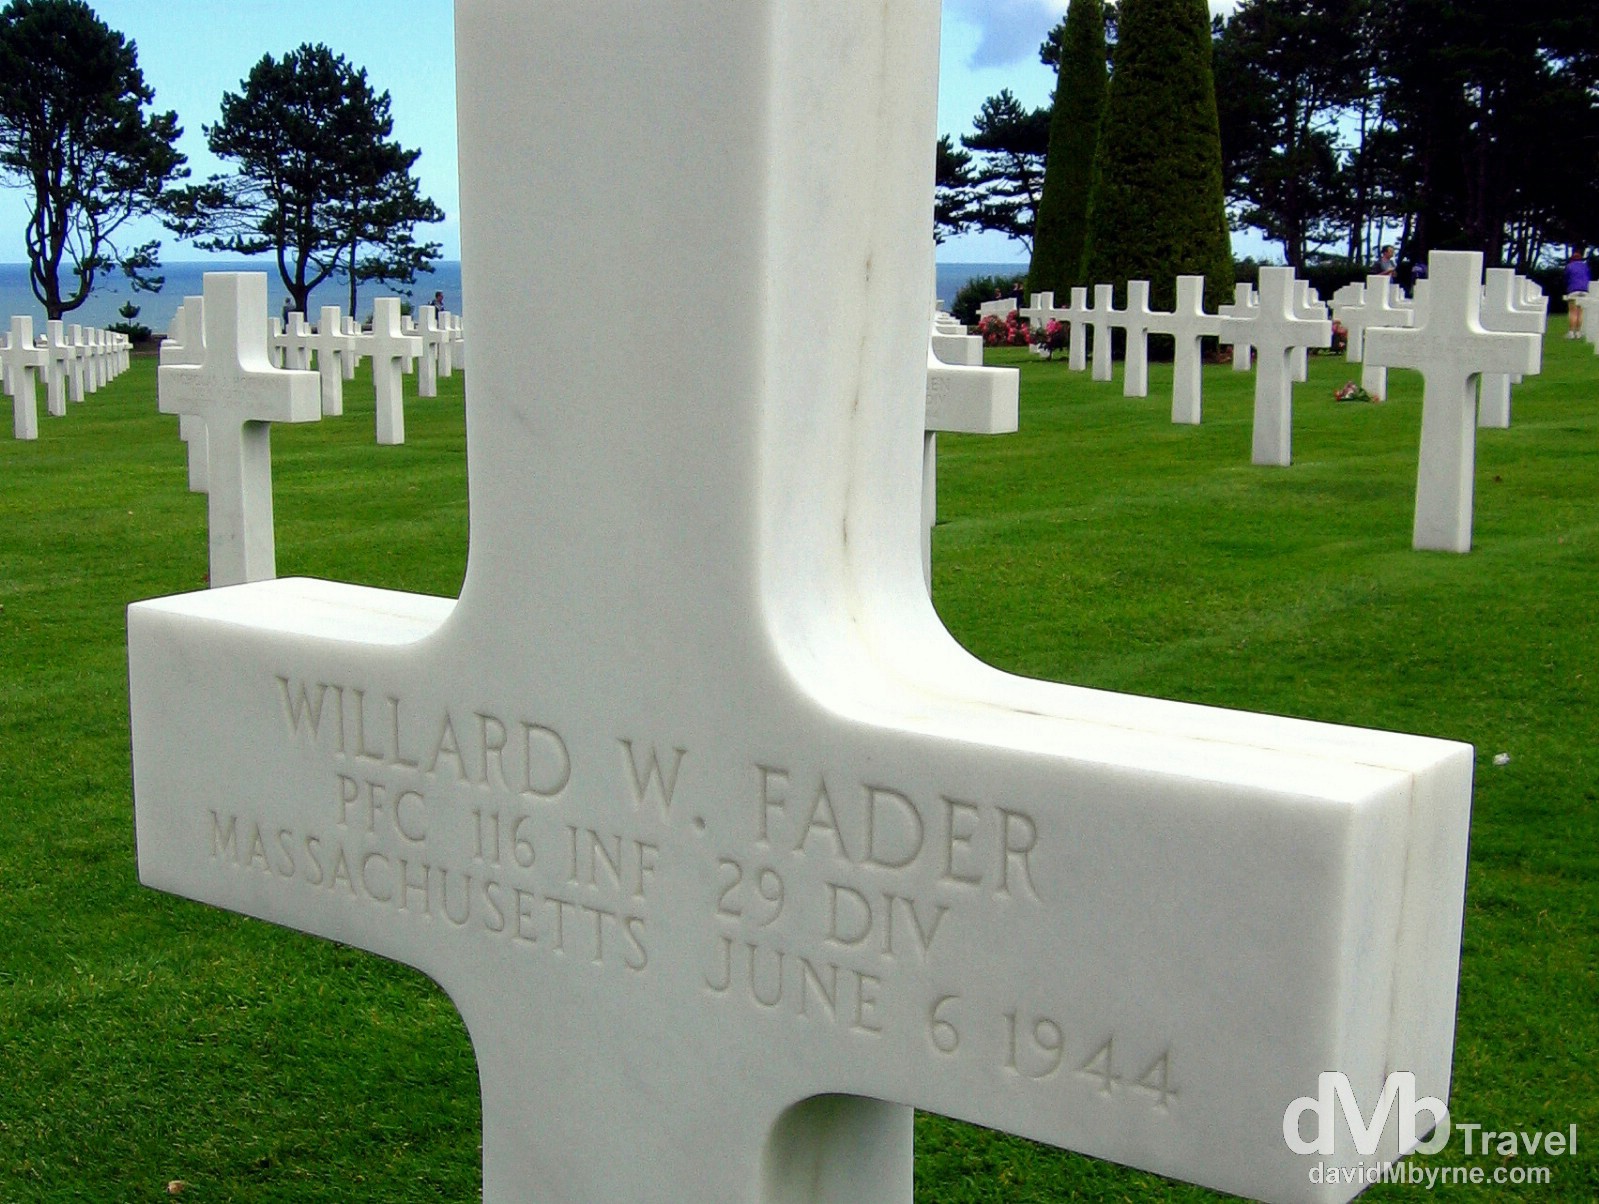 D-Day. June 6th 1944. The American War Cemetery at Colleville sur mer, Normandy, France. August 16th 2007.